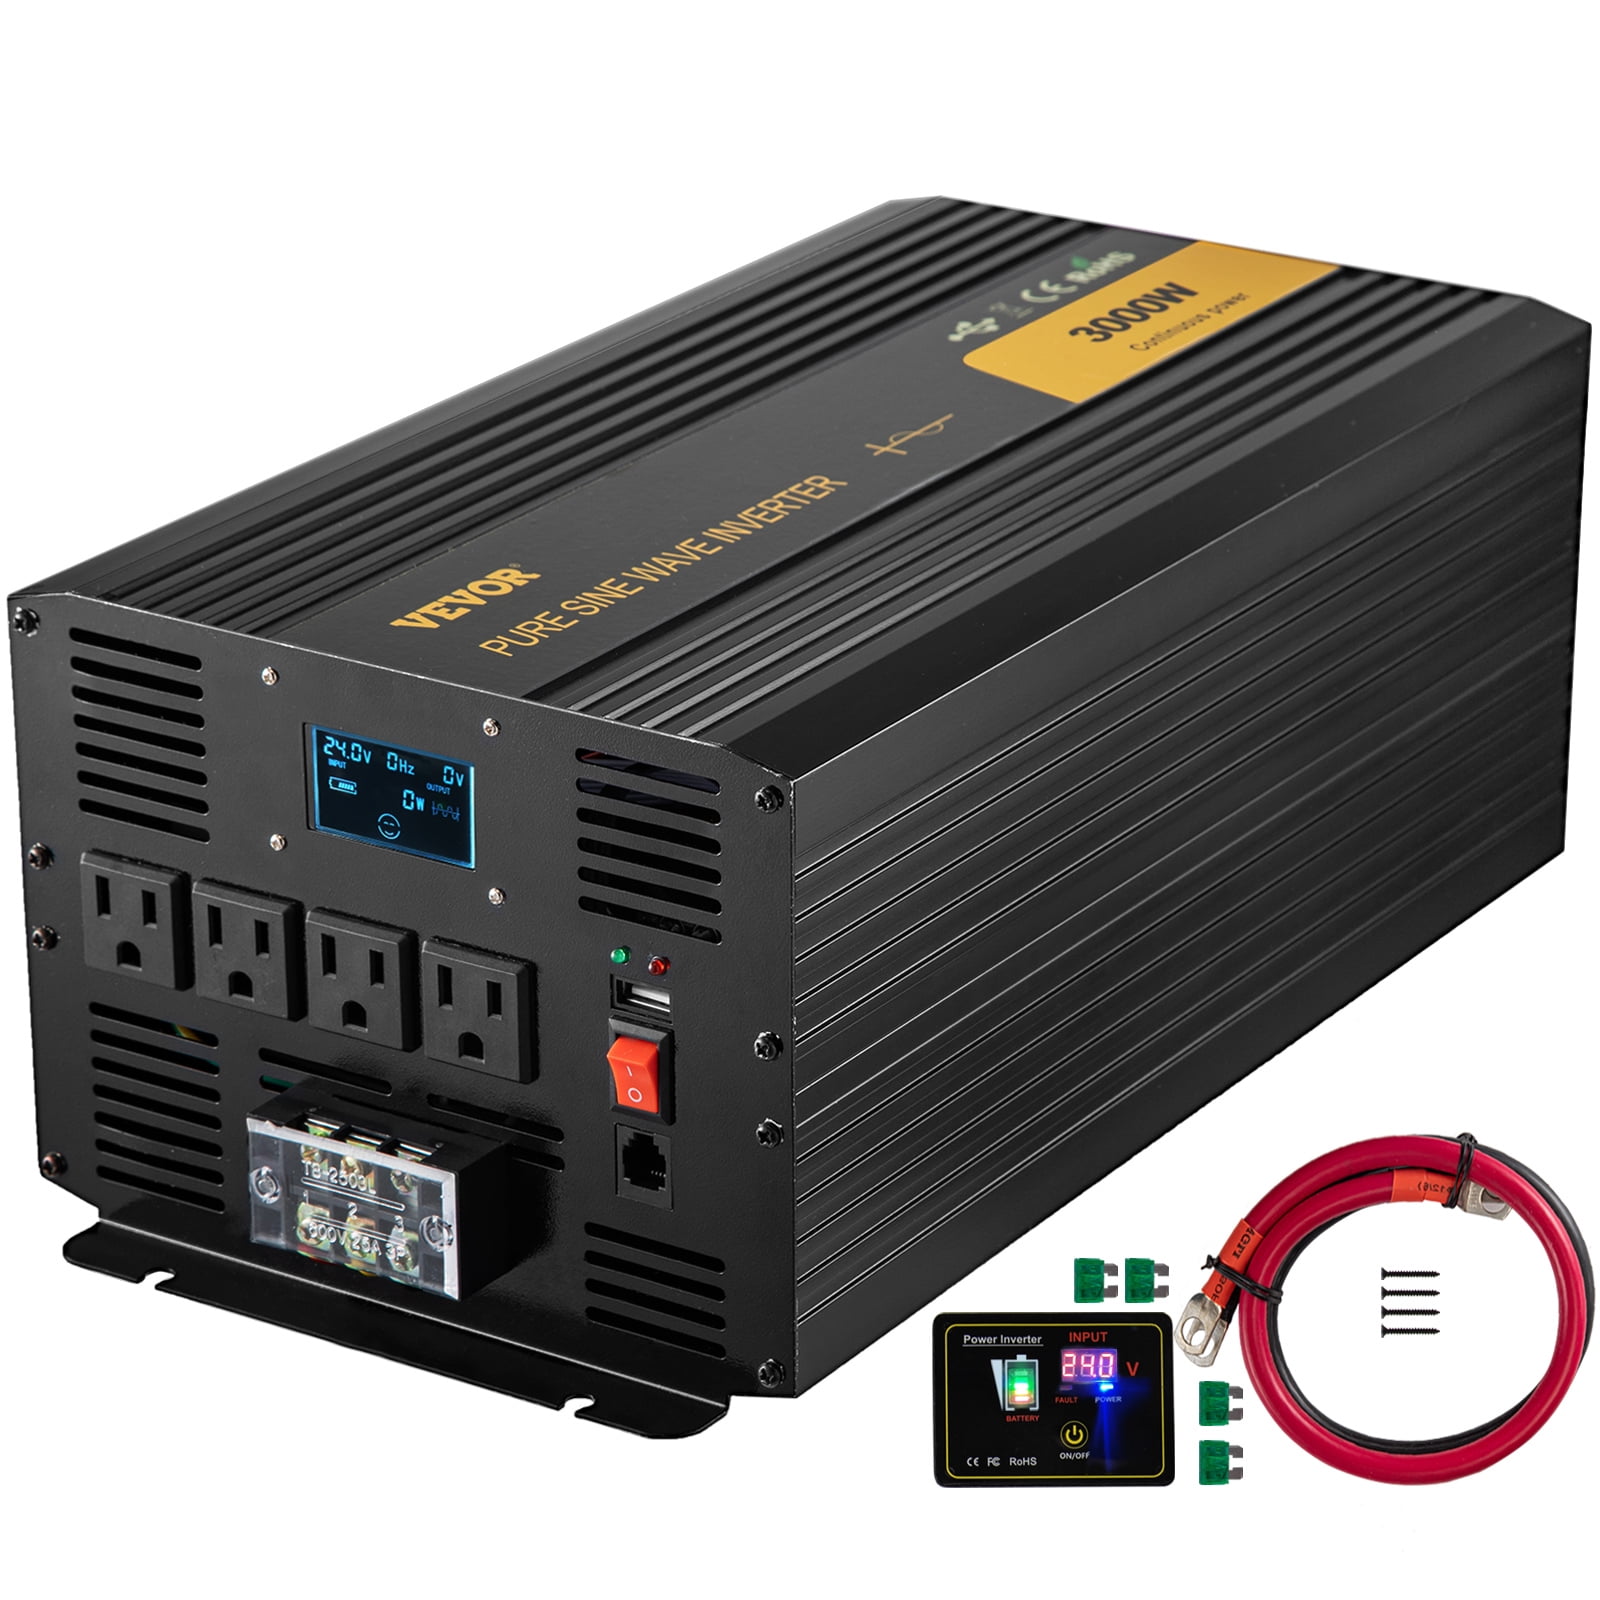 LCD Car Power Inverter 24V DC to 120V AC 60HZ 2000W Pure Sine Wave with USB Port 